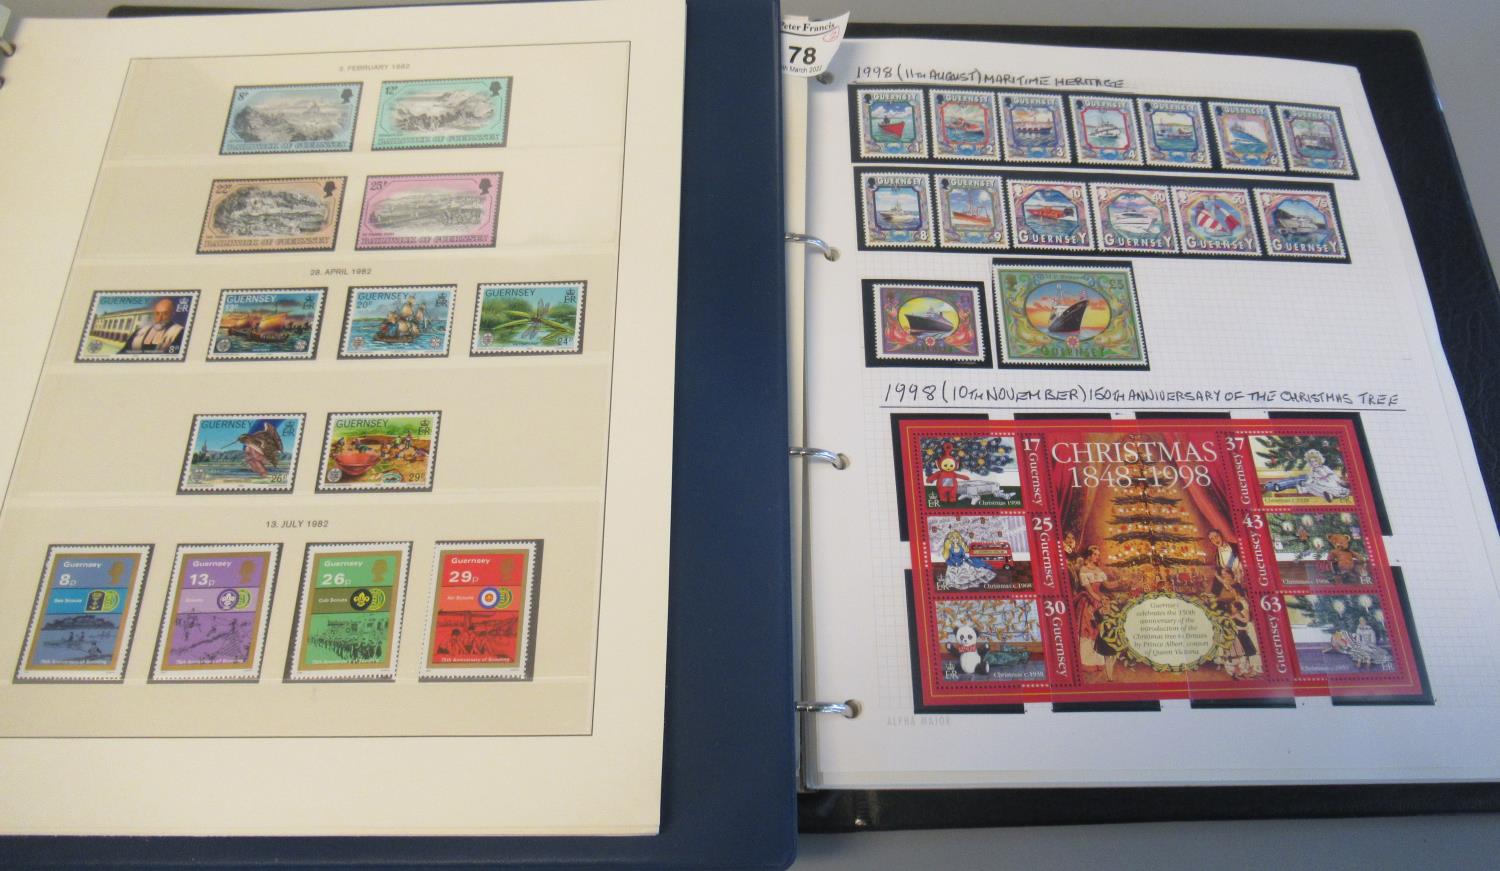 Guernsey u/m mint collection of stamps in two albums 1969-2010 period including mini sheets. (B.P.